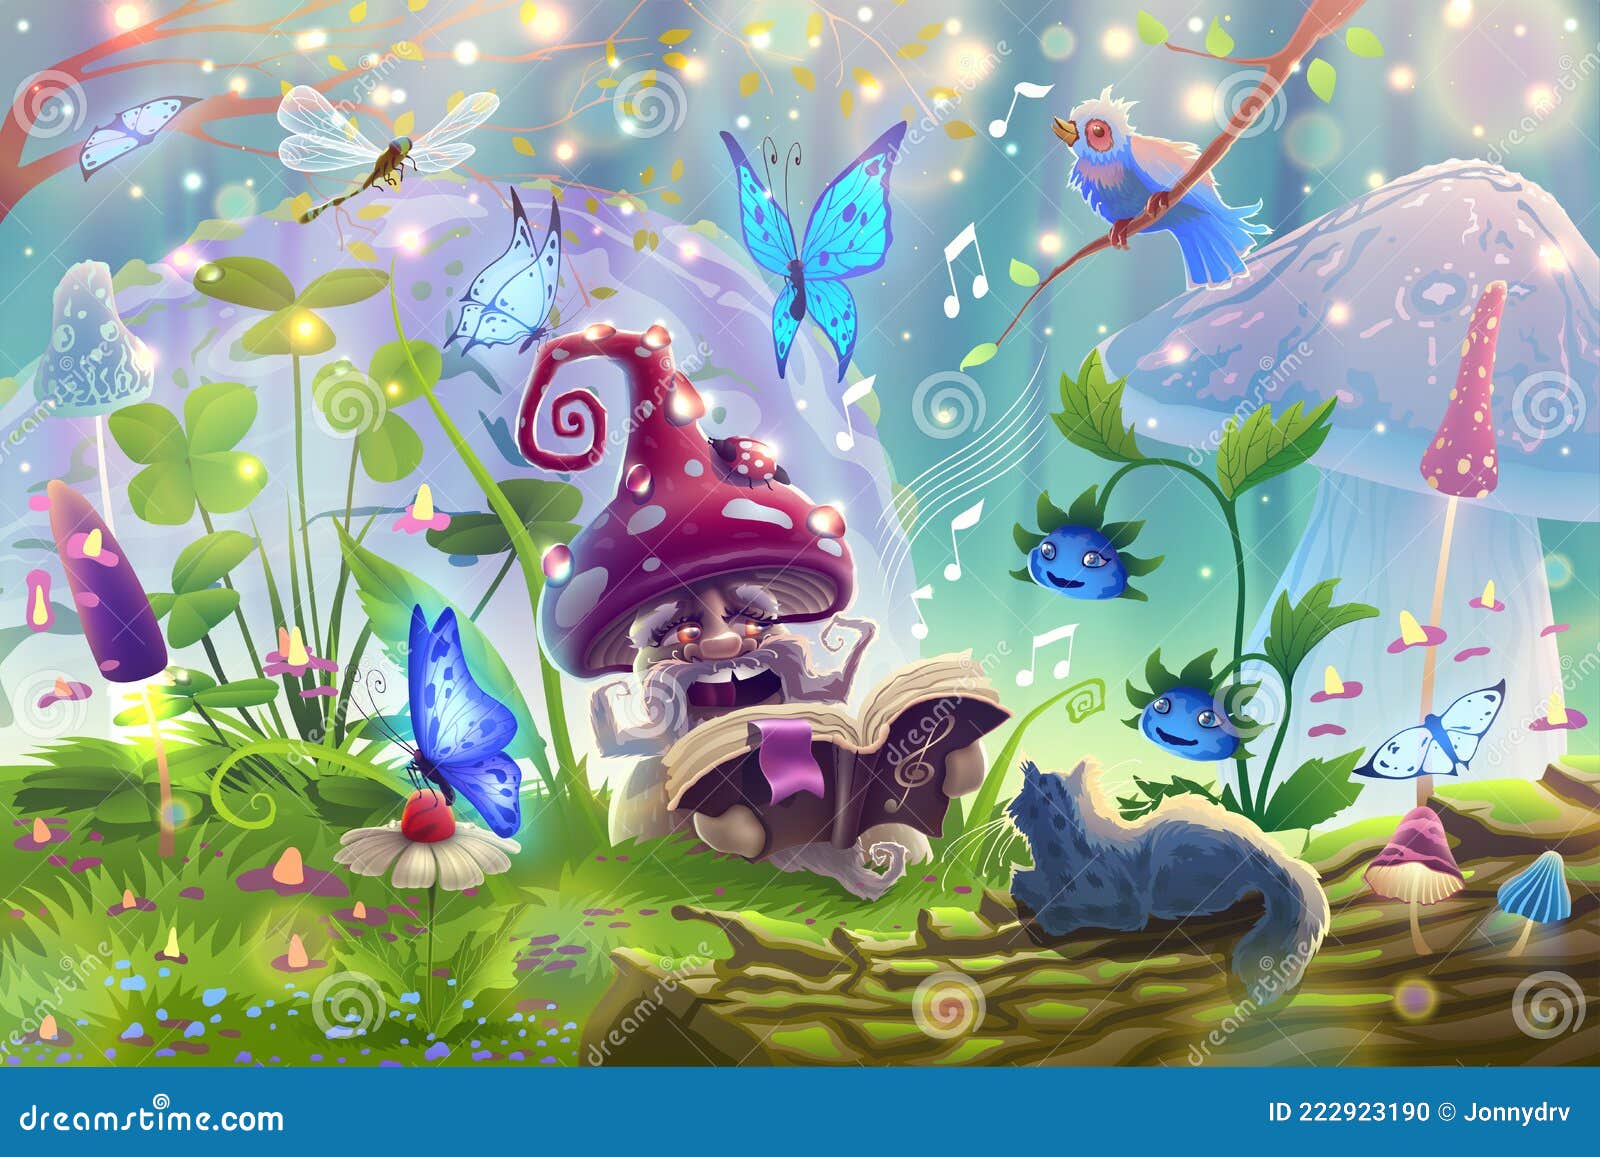 Mushroom in Magic Forest with Fantasy Wild Animals in Summer Garden  Landscape Sings a Song among the Trees, Butterflies, Sunlight Stock Vector  - Illustration of outdoors, drawing: 222923190